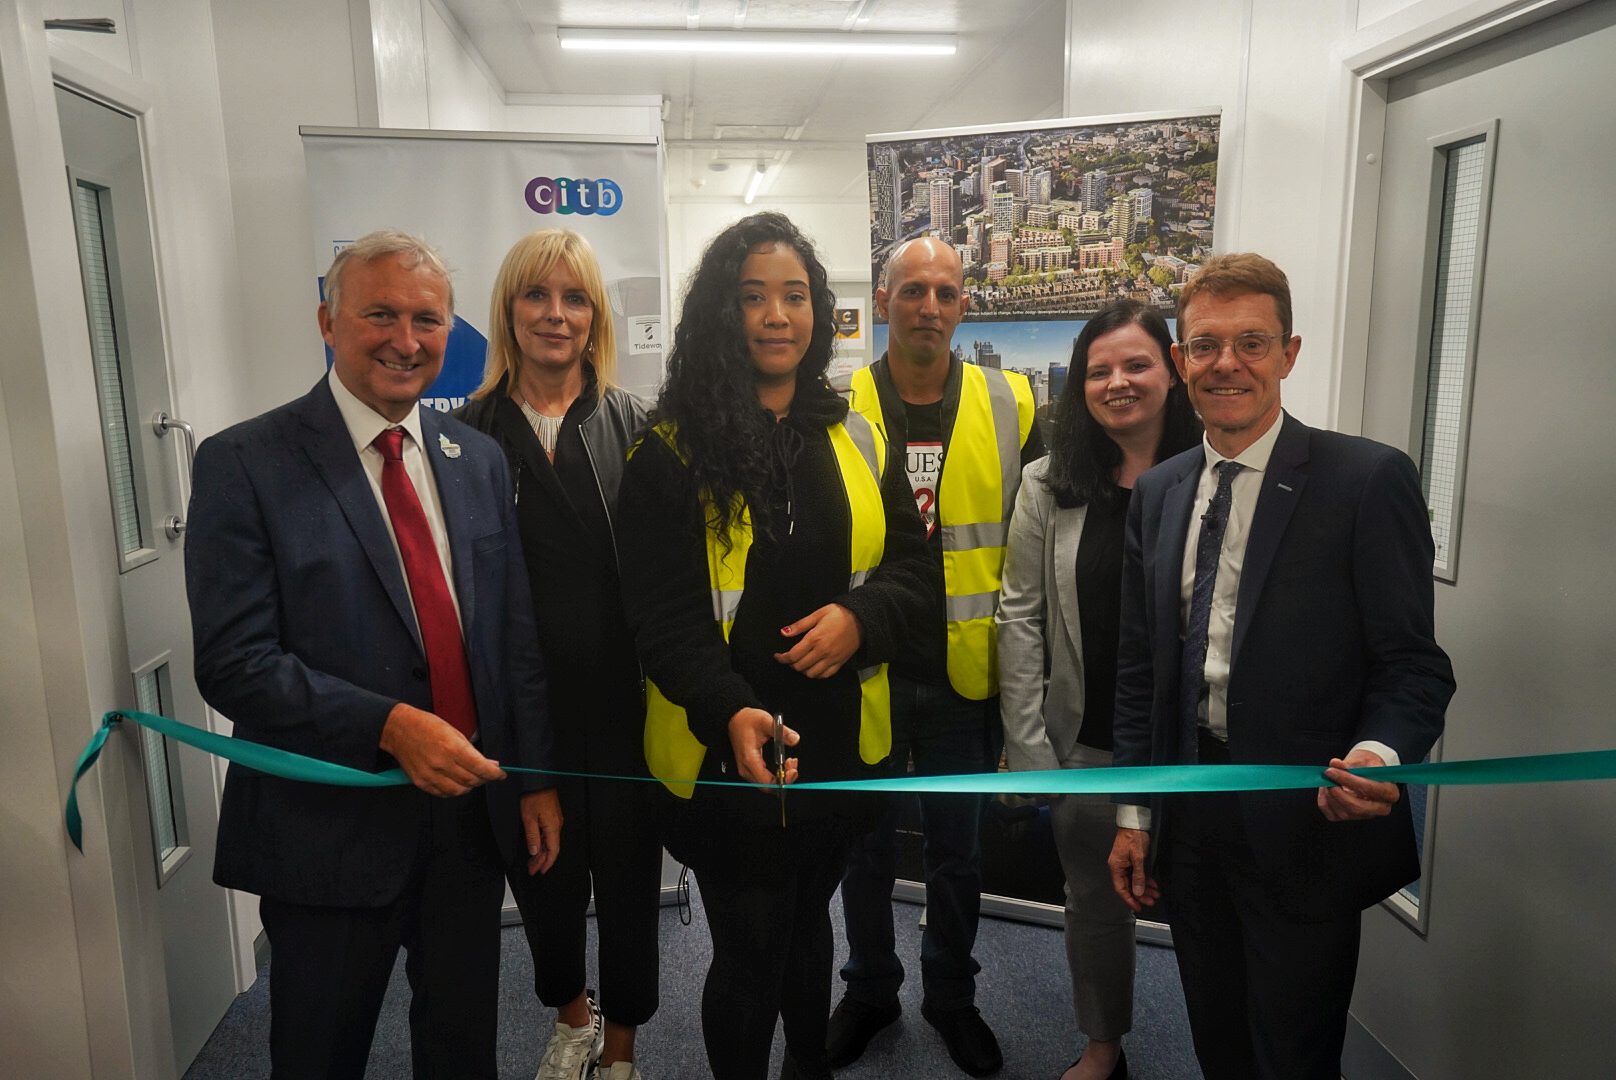 (from left) Cllr Ian Ward, leader of Birmingham City Council, Anna Evans, project director for the Perry Barr Residential Scheme at developers Lendlease, trainees Imaan Khan and Zubar Akram, Sarah Fenton from CITB, and Mayor of the West Midlands Andy Street officially cut the ribbon to open the construction training hub at the Perry Barr Residential Scheme.